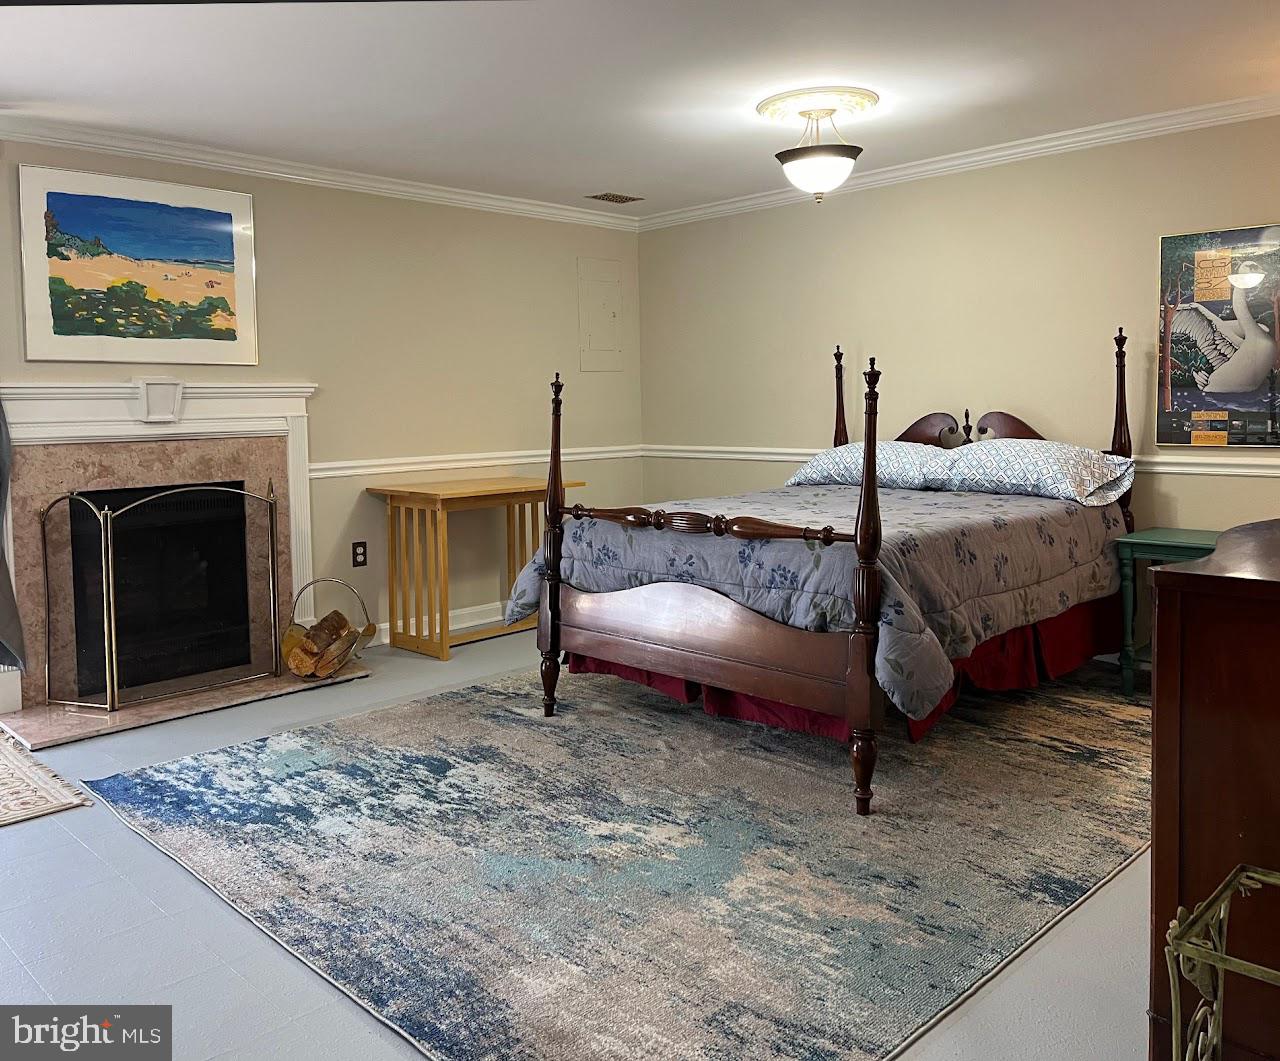 a bed room with a bed and a fireplace